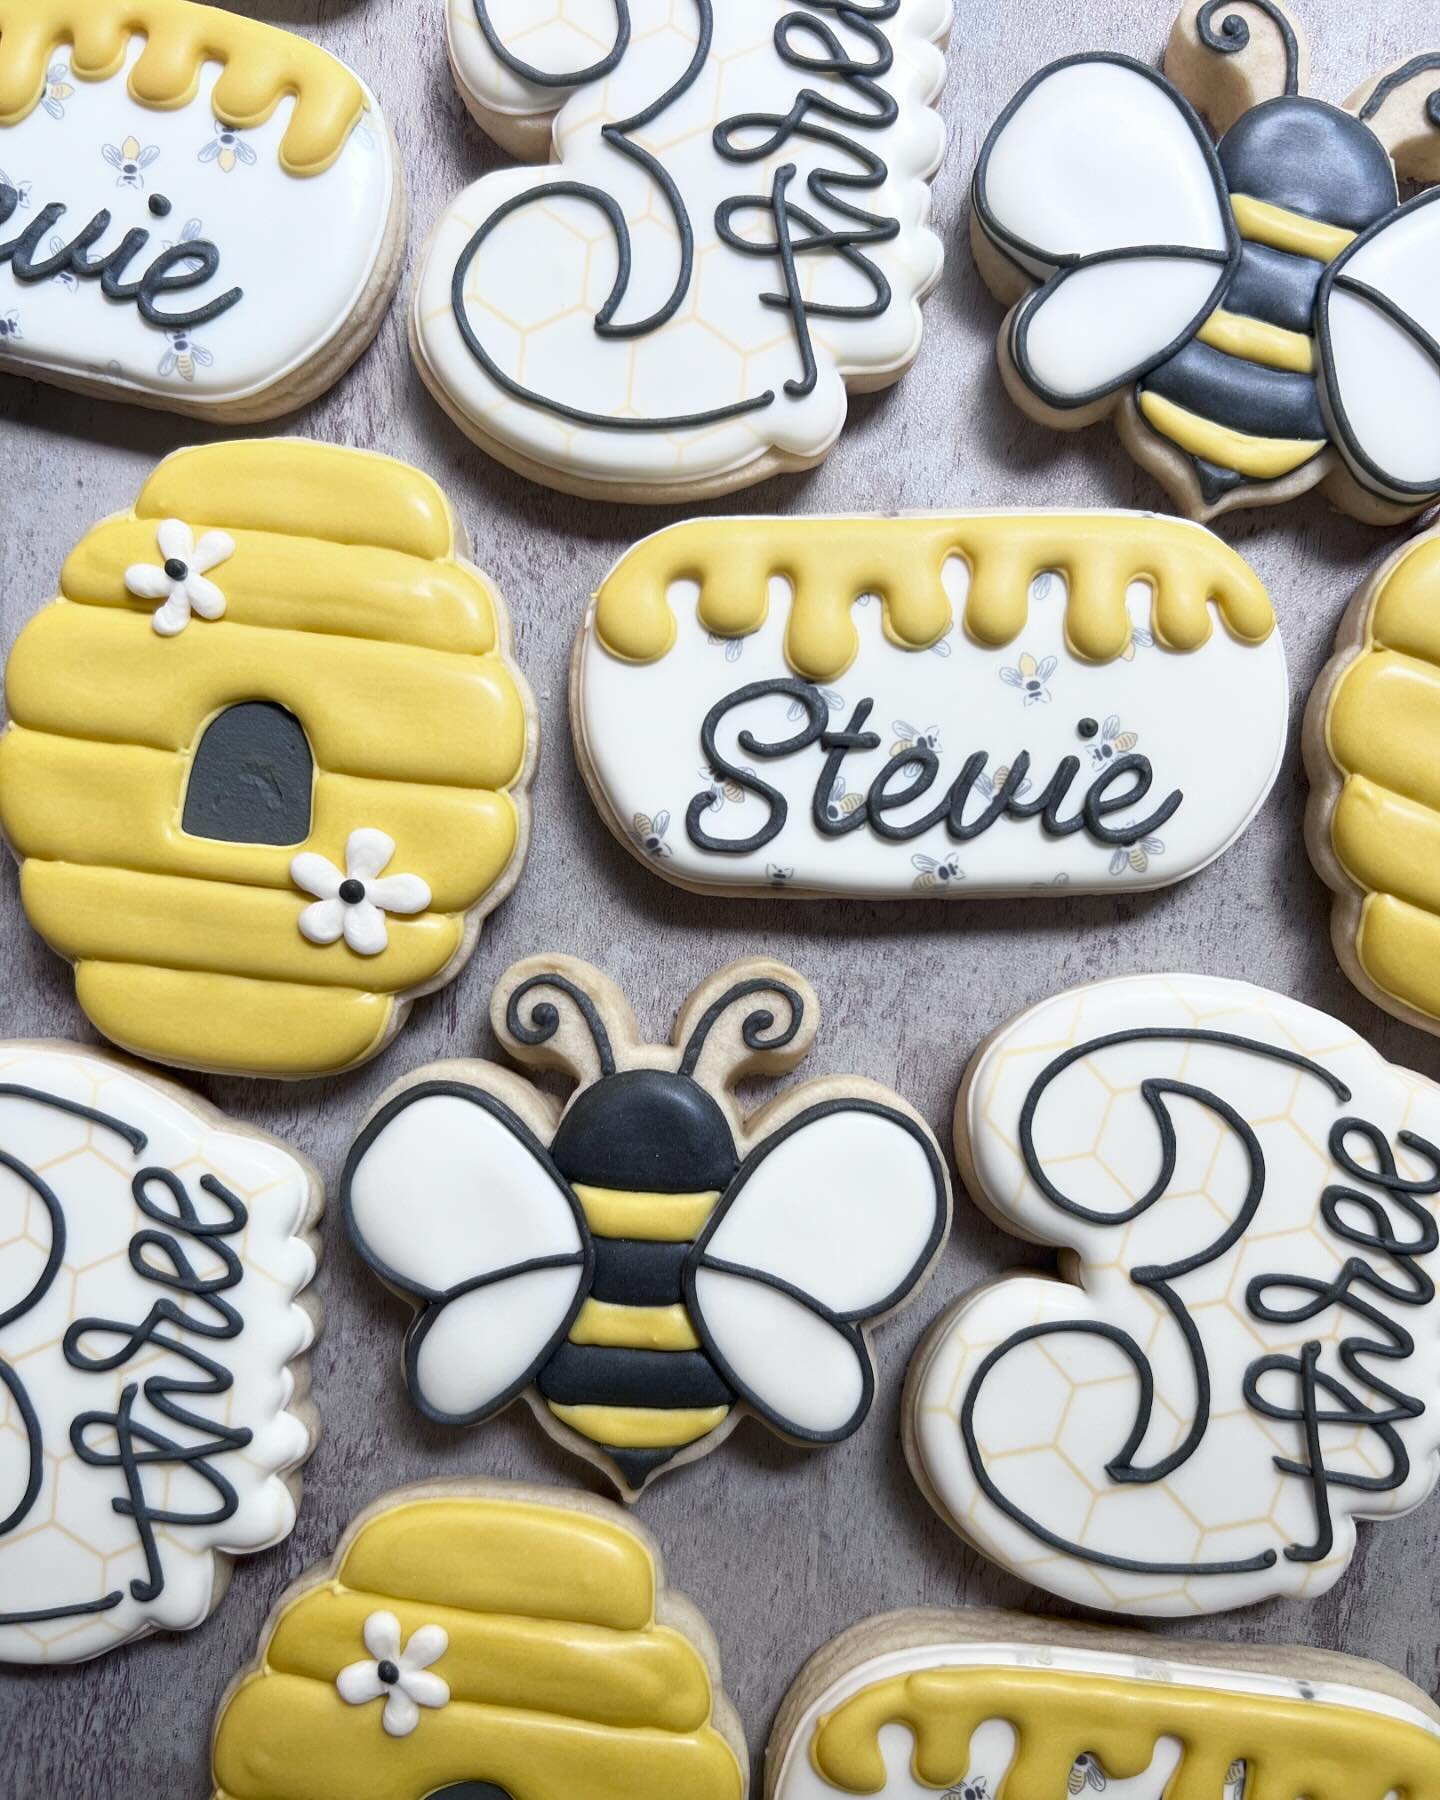 Another Bee but this time for a birthday! 🐝💛